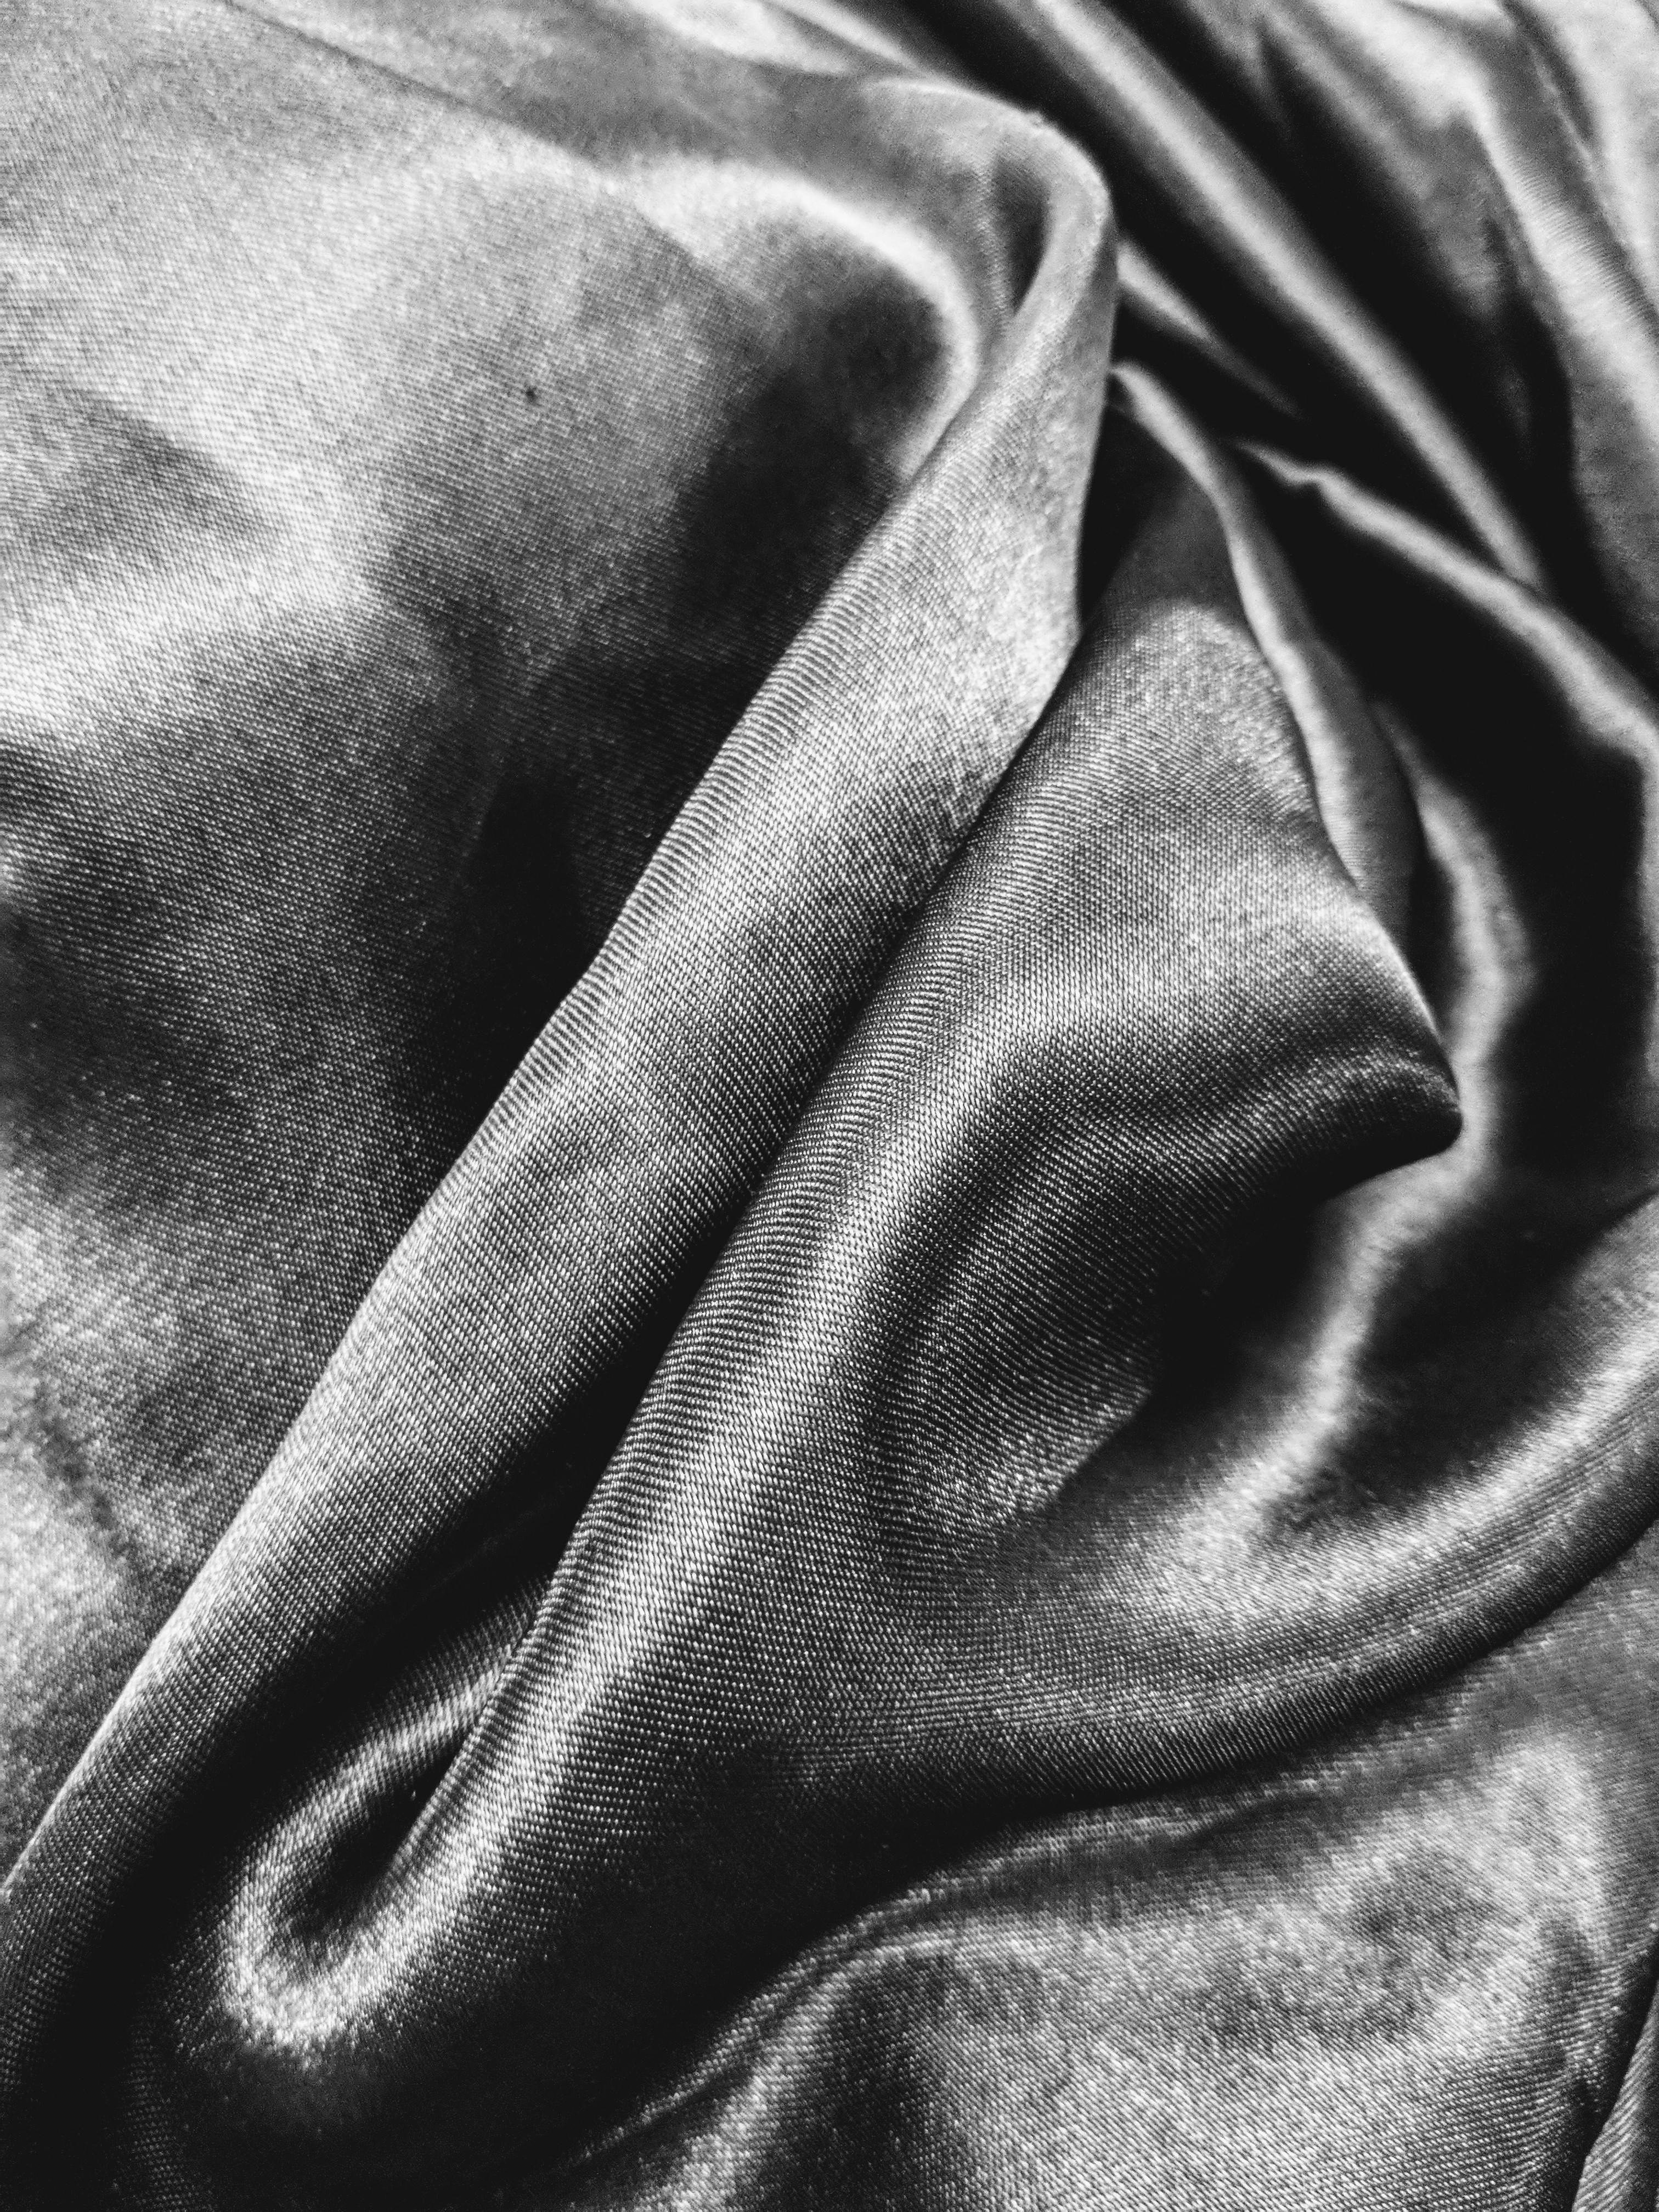 Free stock photo of black and white, black and white satin, black and white sheets